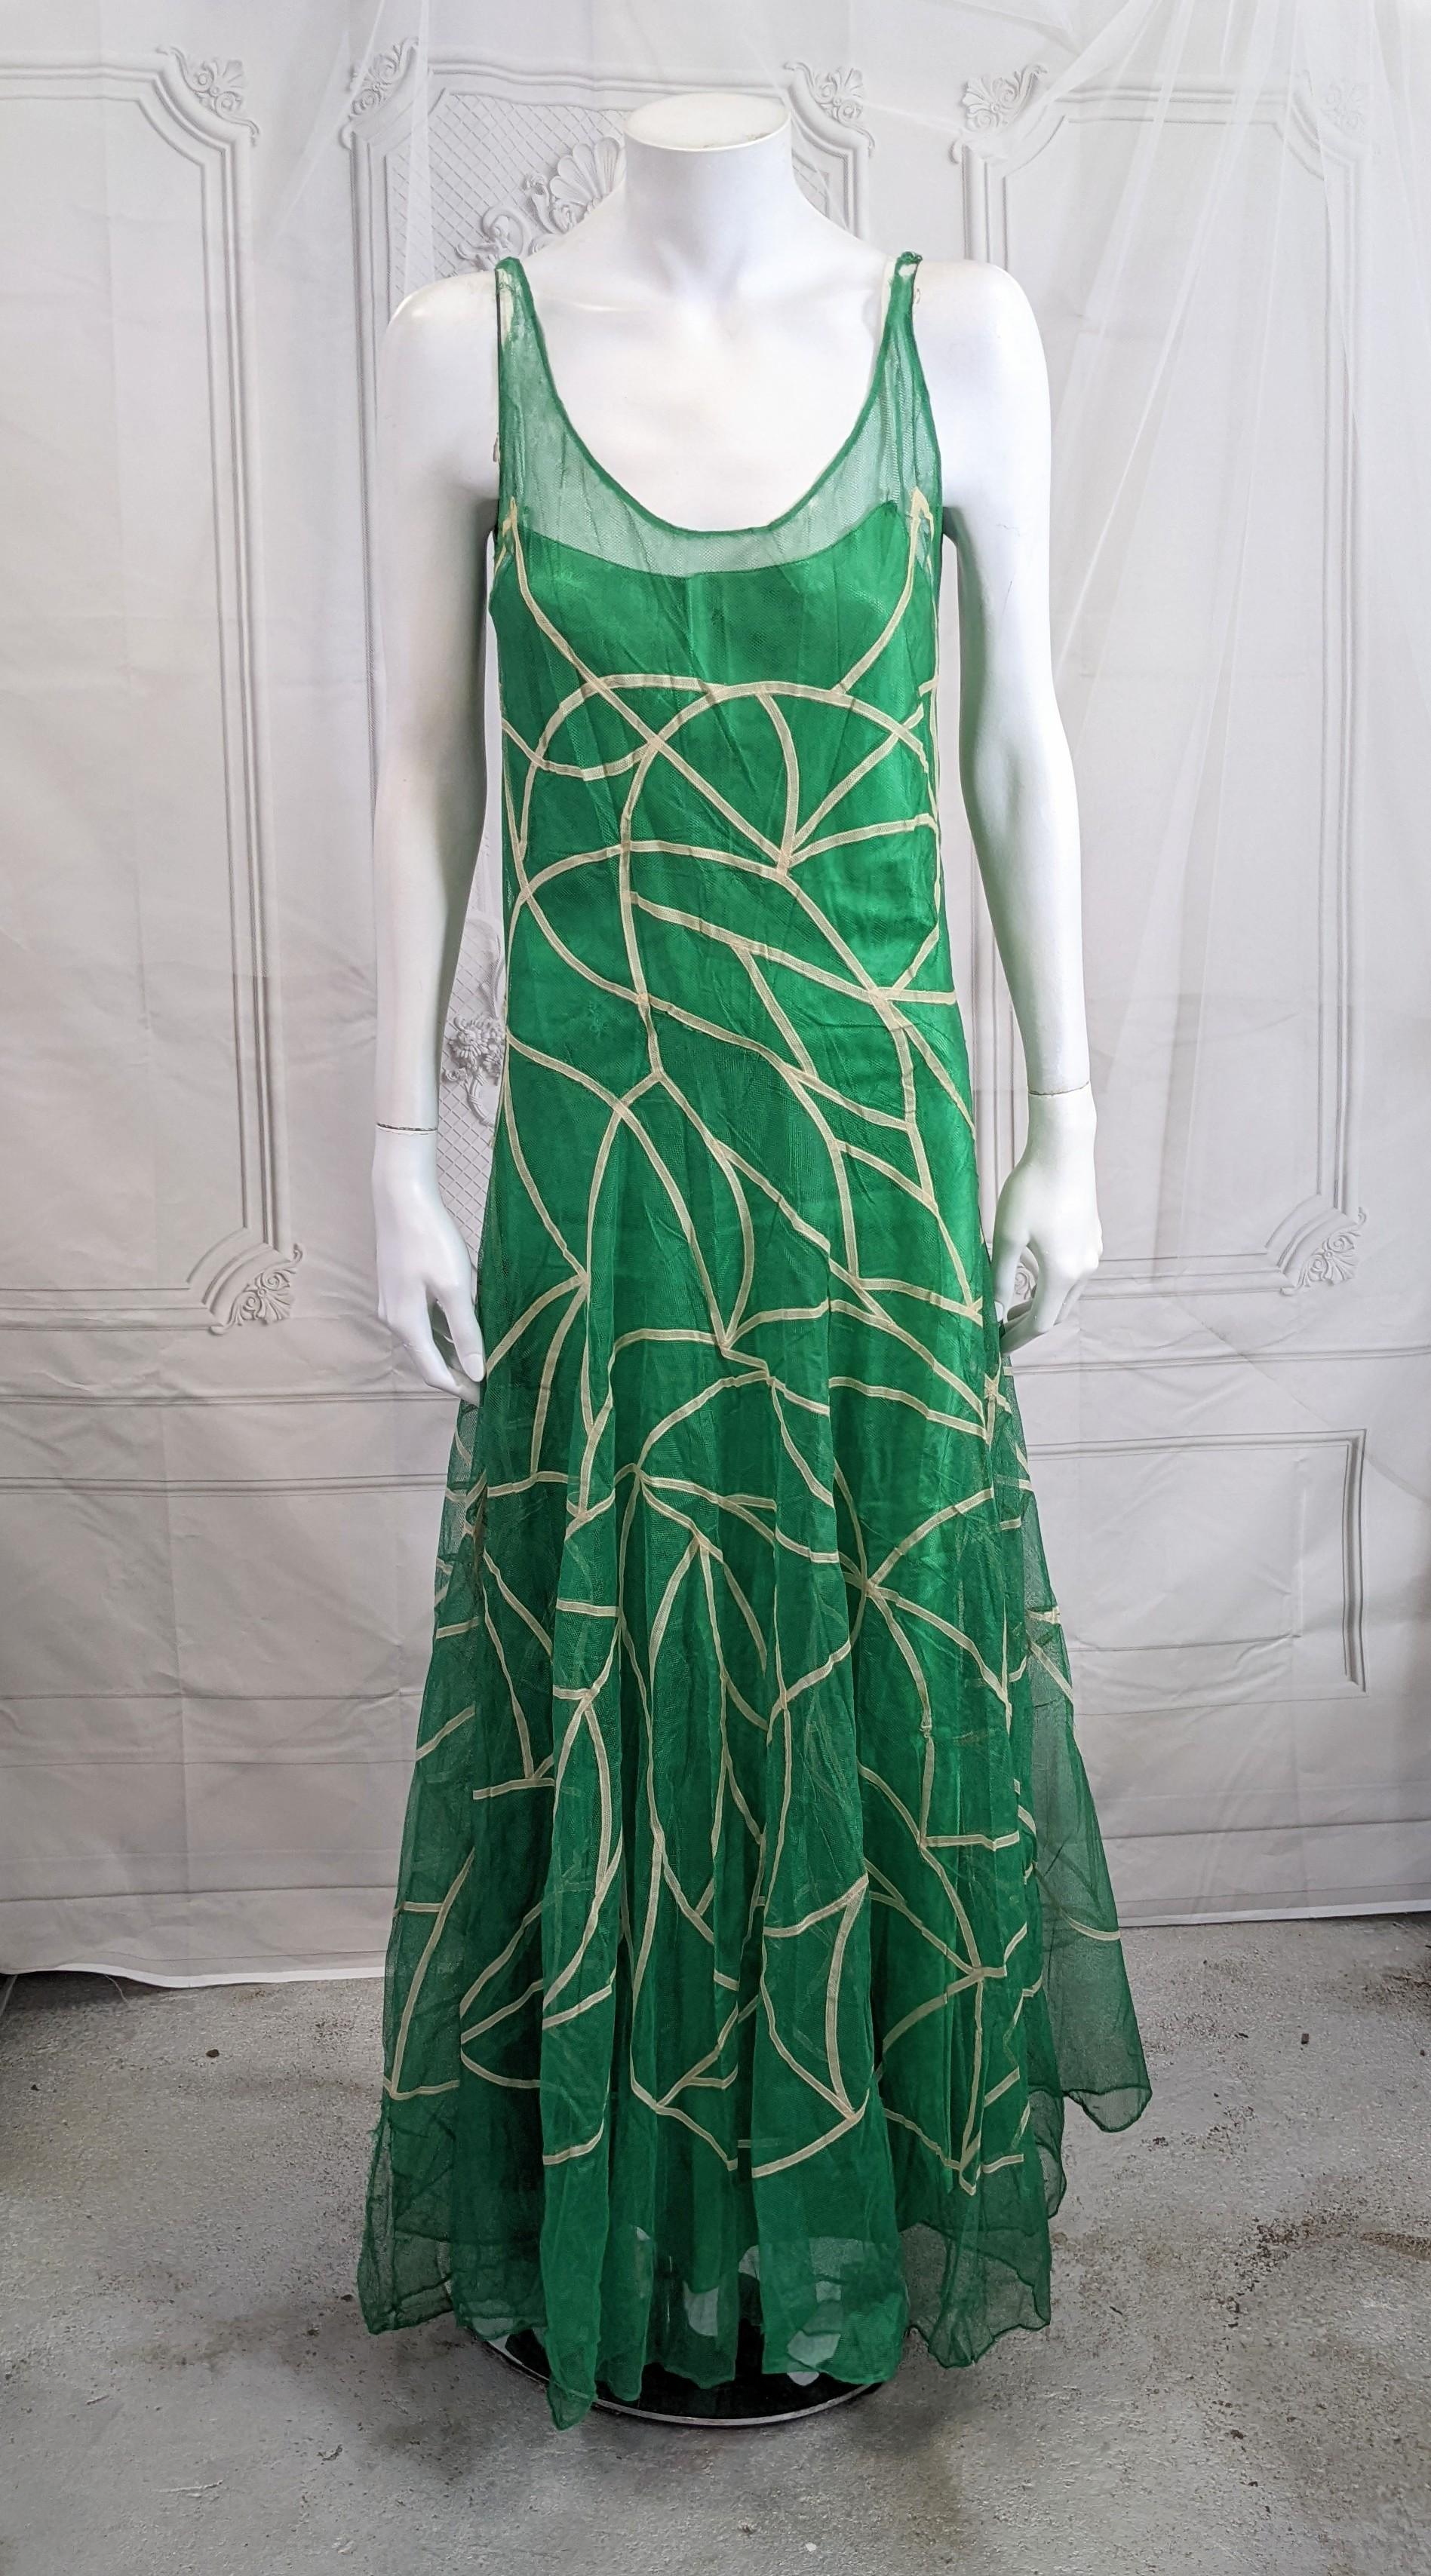 Rare and important Jeanne Lanvin Tulle Art Deco gown from Summer 1931 of grasshopper green silk tulle with natural tulle strips applied to create petal like patterns across the gown. Extremely intelligent in design with incredible High Art Deco